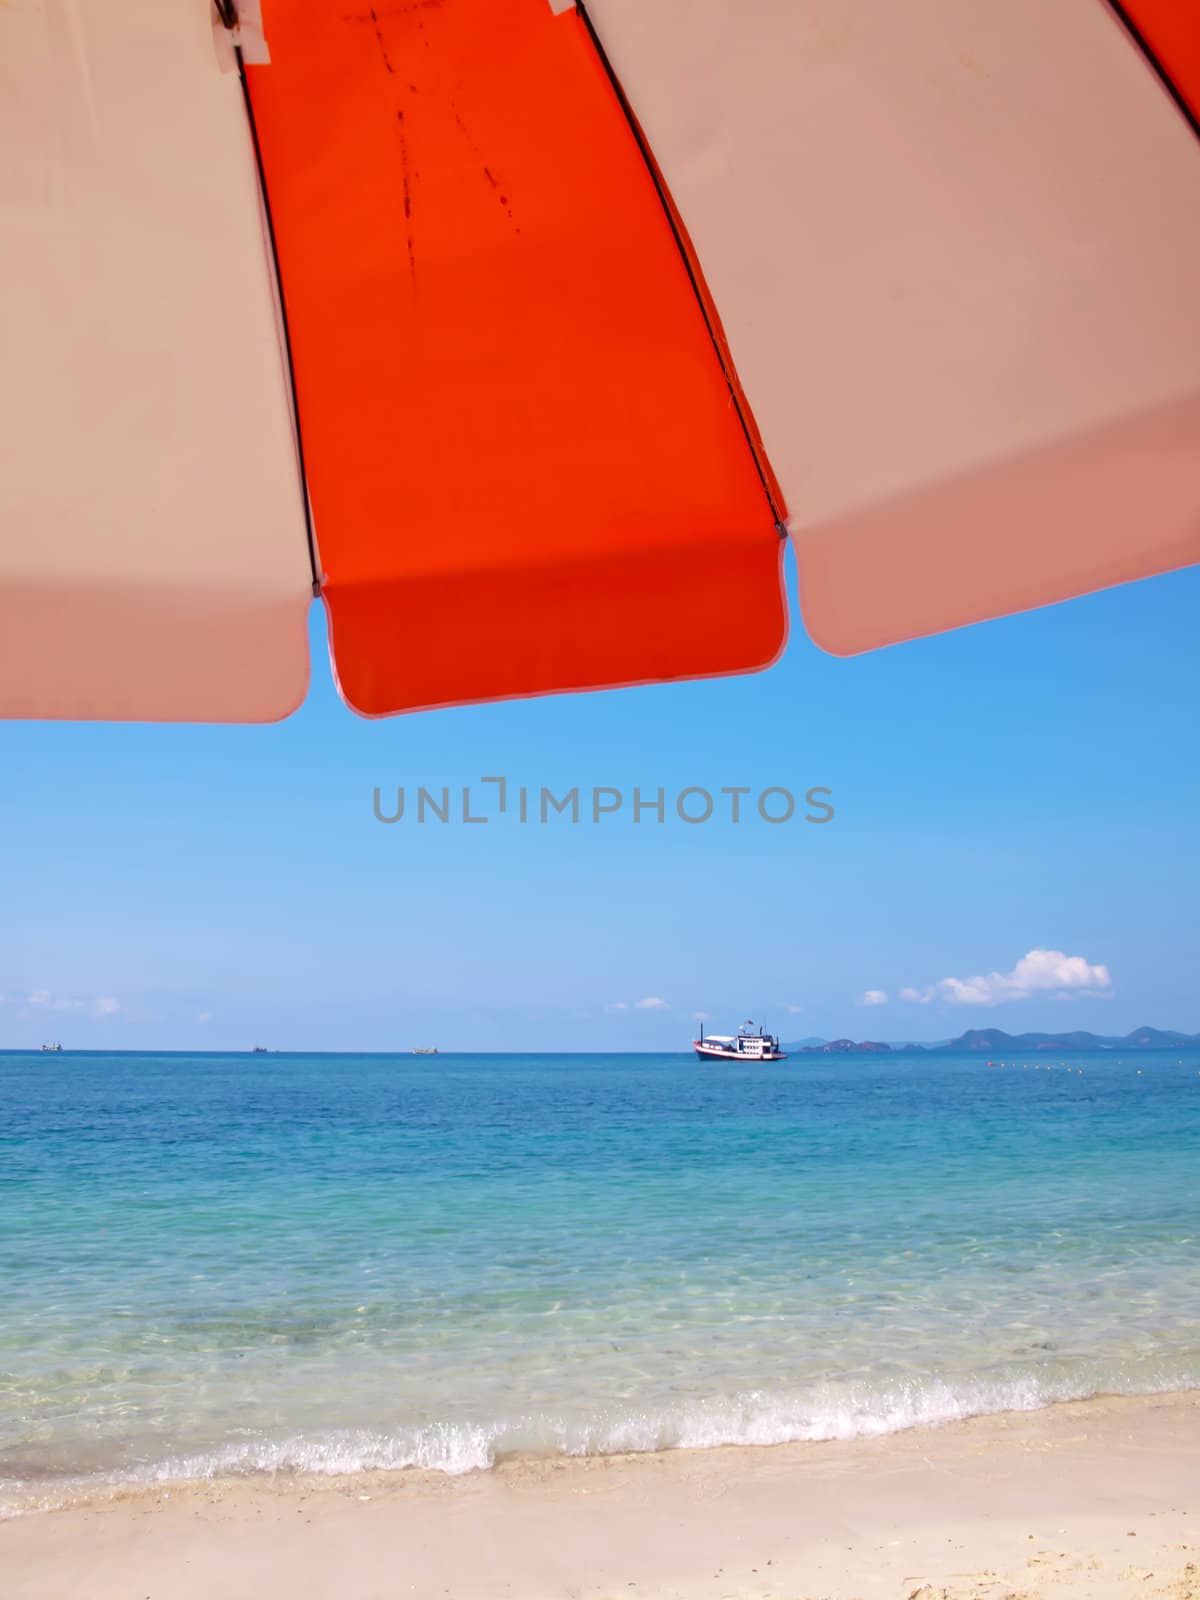 Sunshade on beach with boat by Exsodus